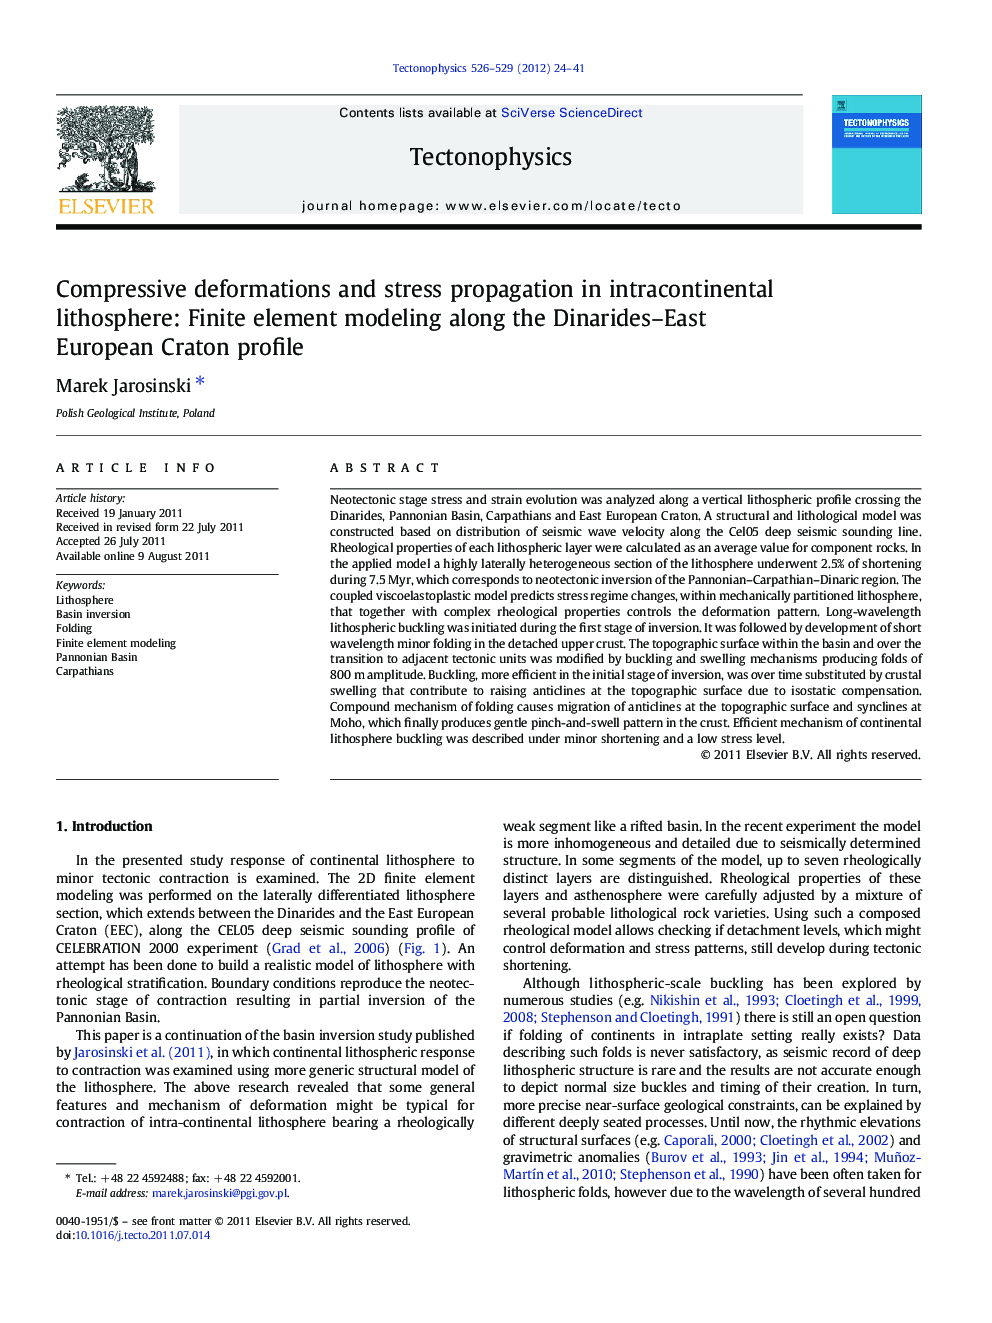 Compressive deformations and stress propagation in intracontinental lithosphere: Finite element modeling along the Dinarides–East European Craton profile